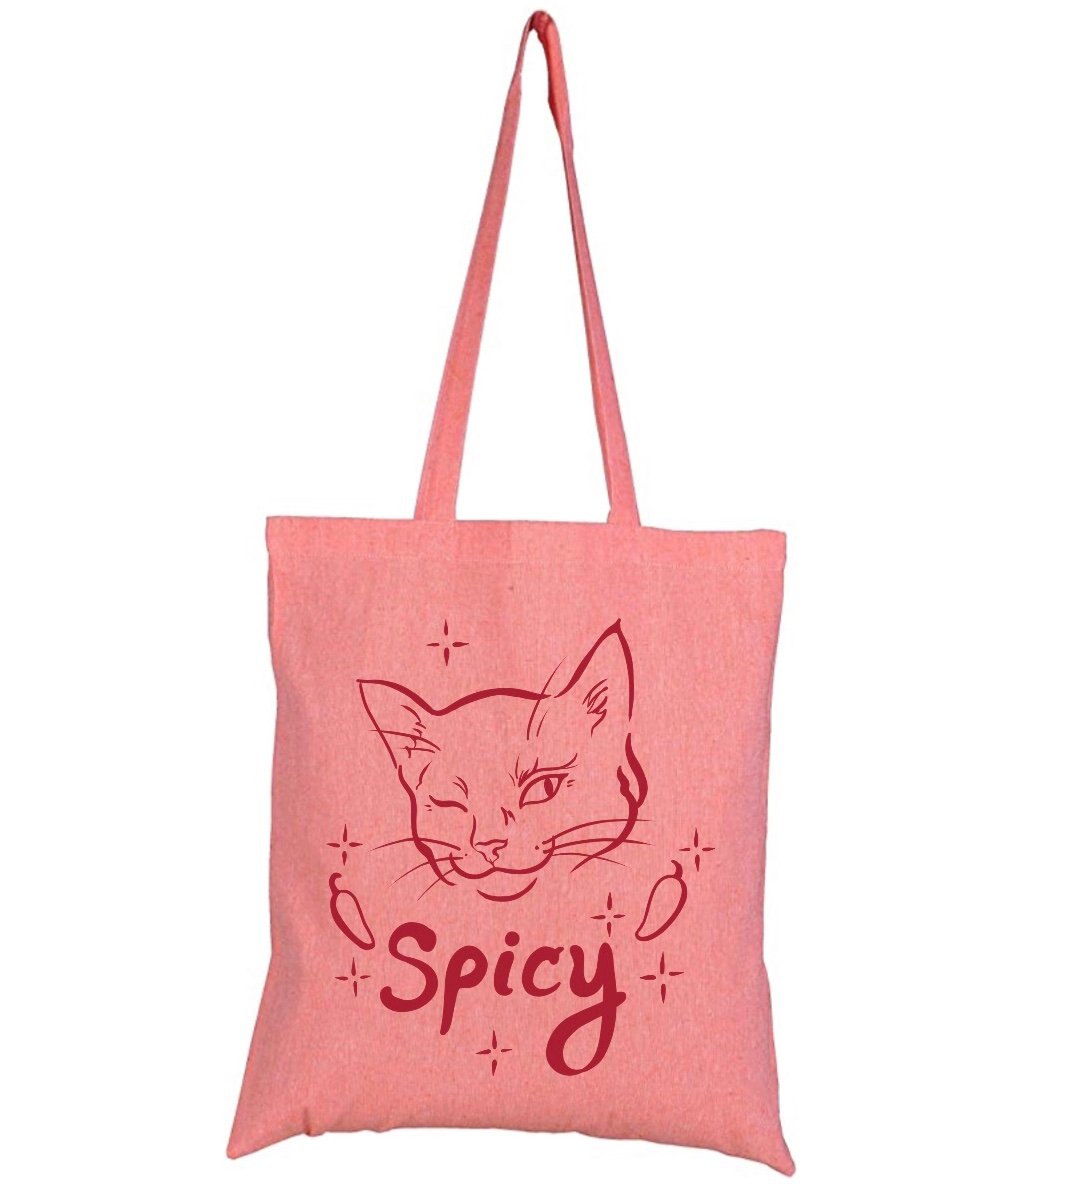 Image of Spicy Tote Bag